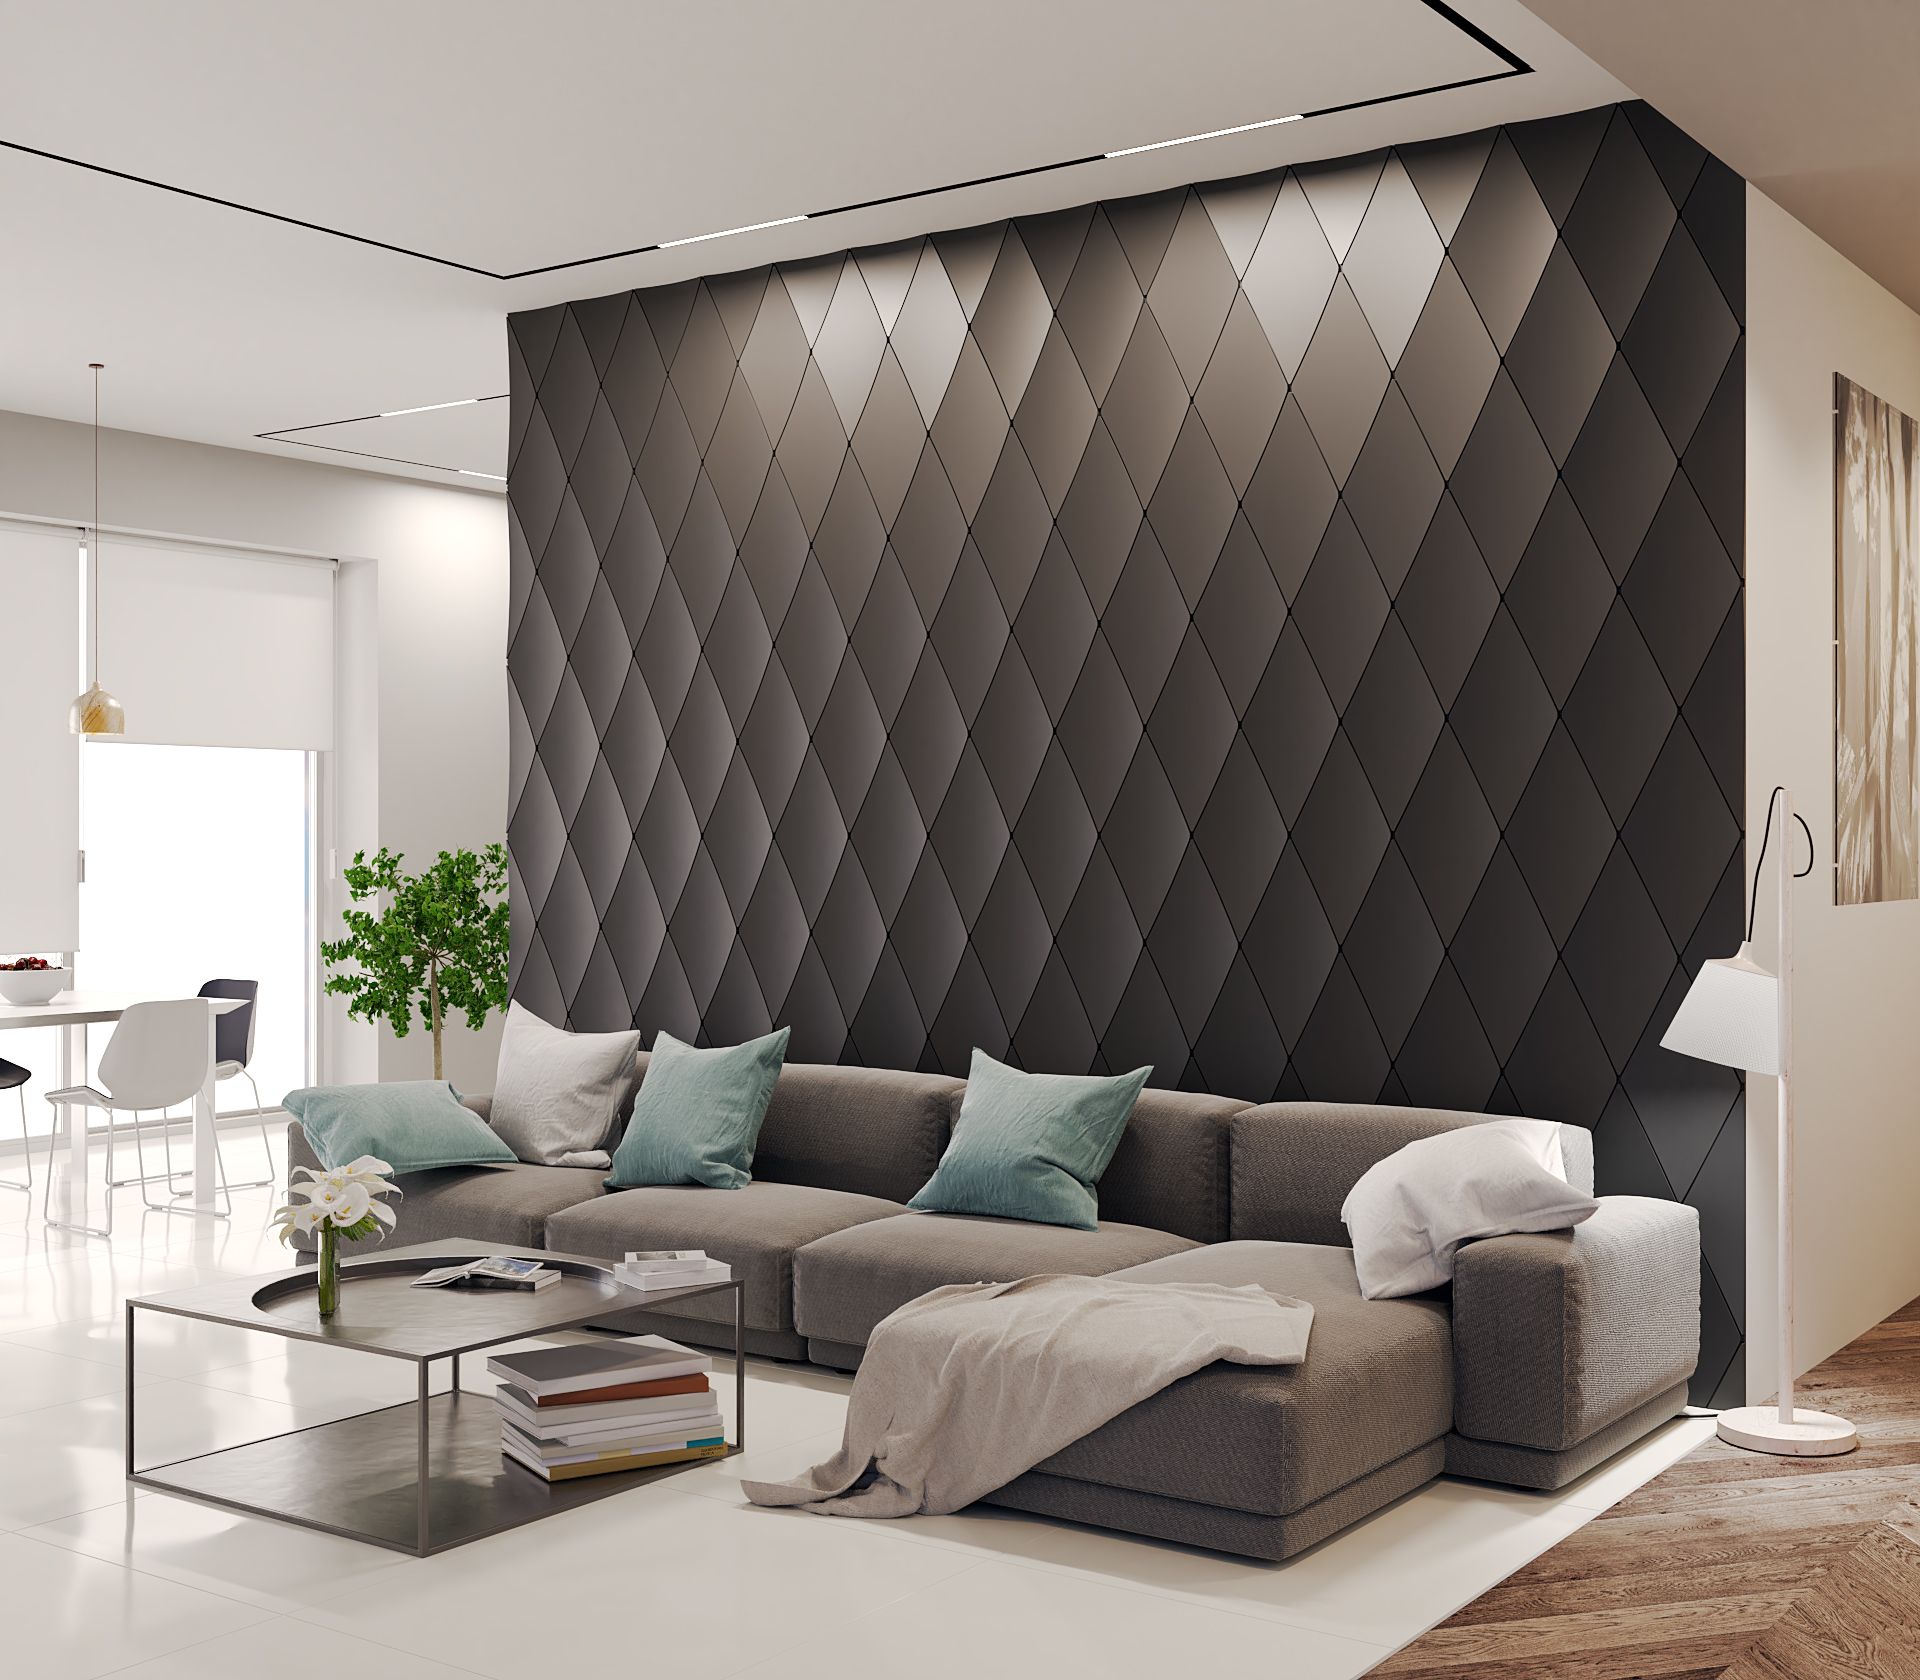 Perfect 3D Wall Panelling Ideas with Epic Design ideas